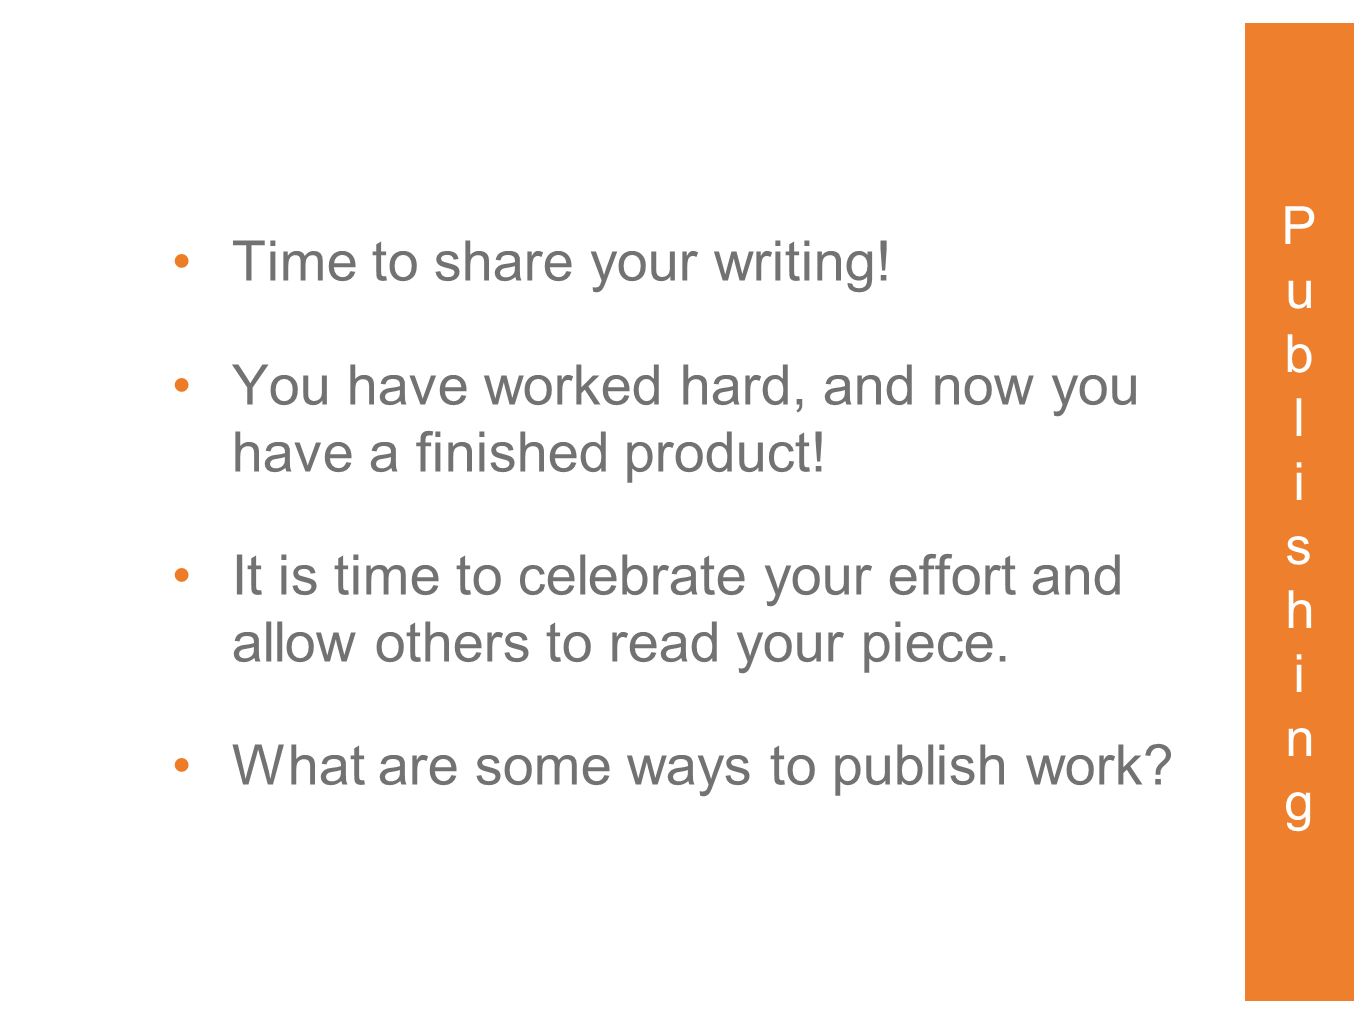 Time to share your writing. You have worked hard, and now you have a finished product.